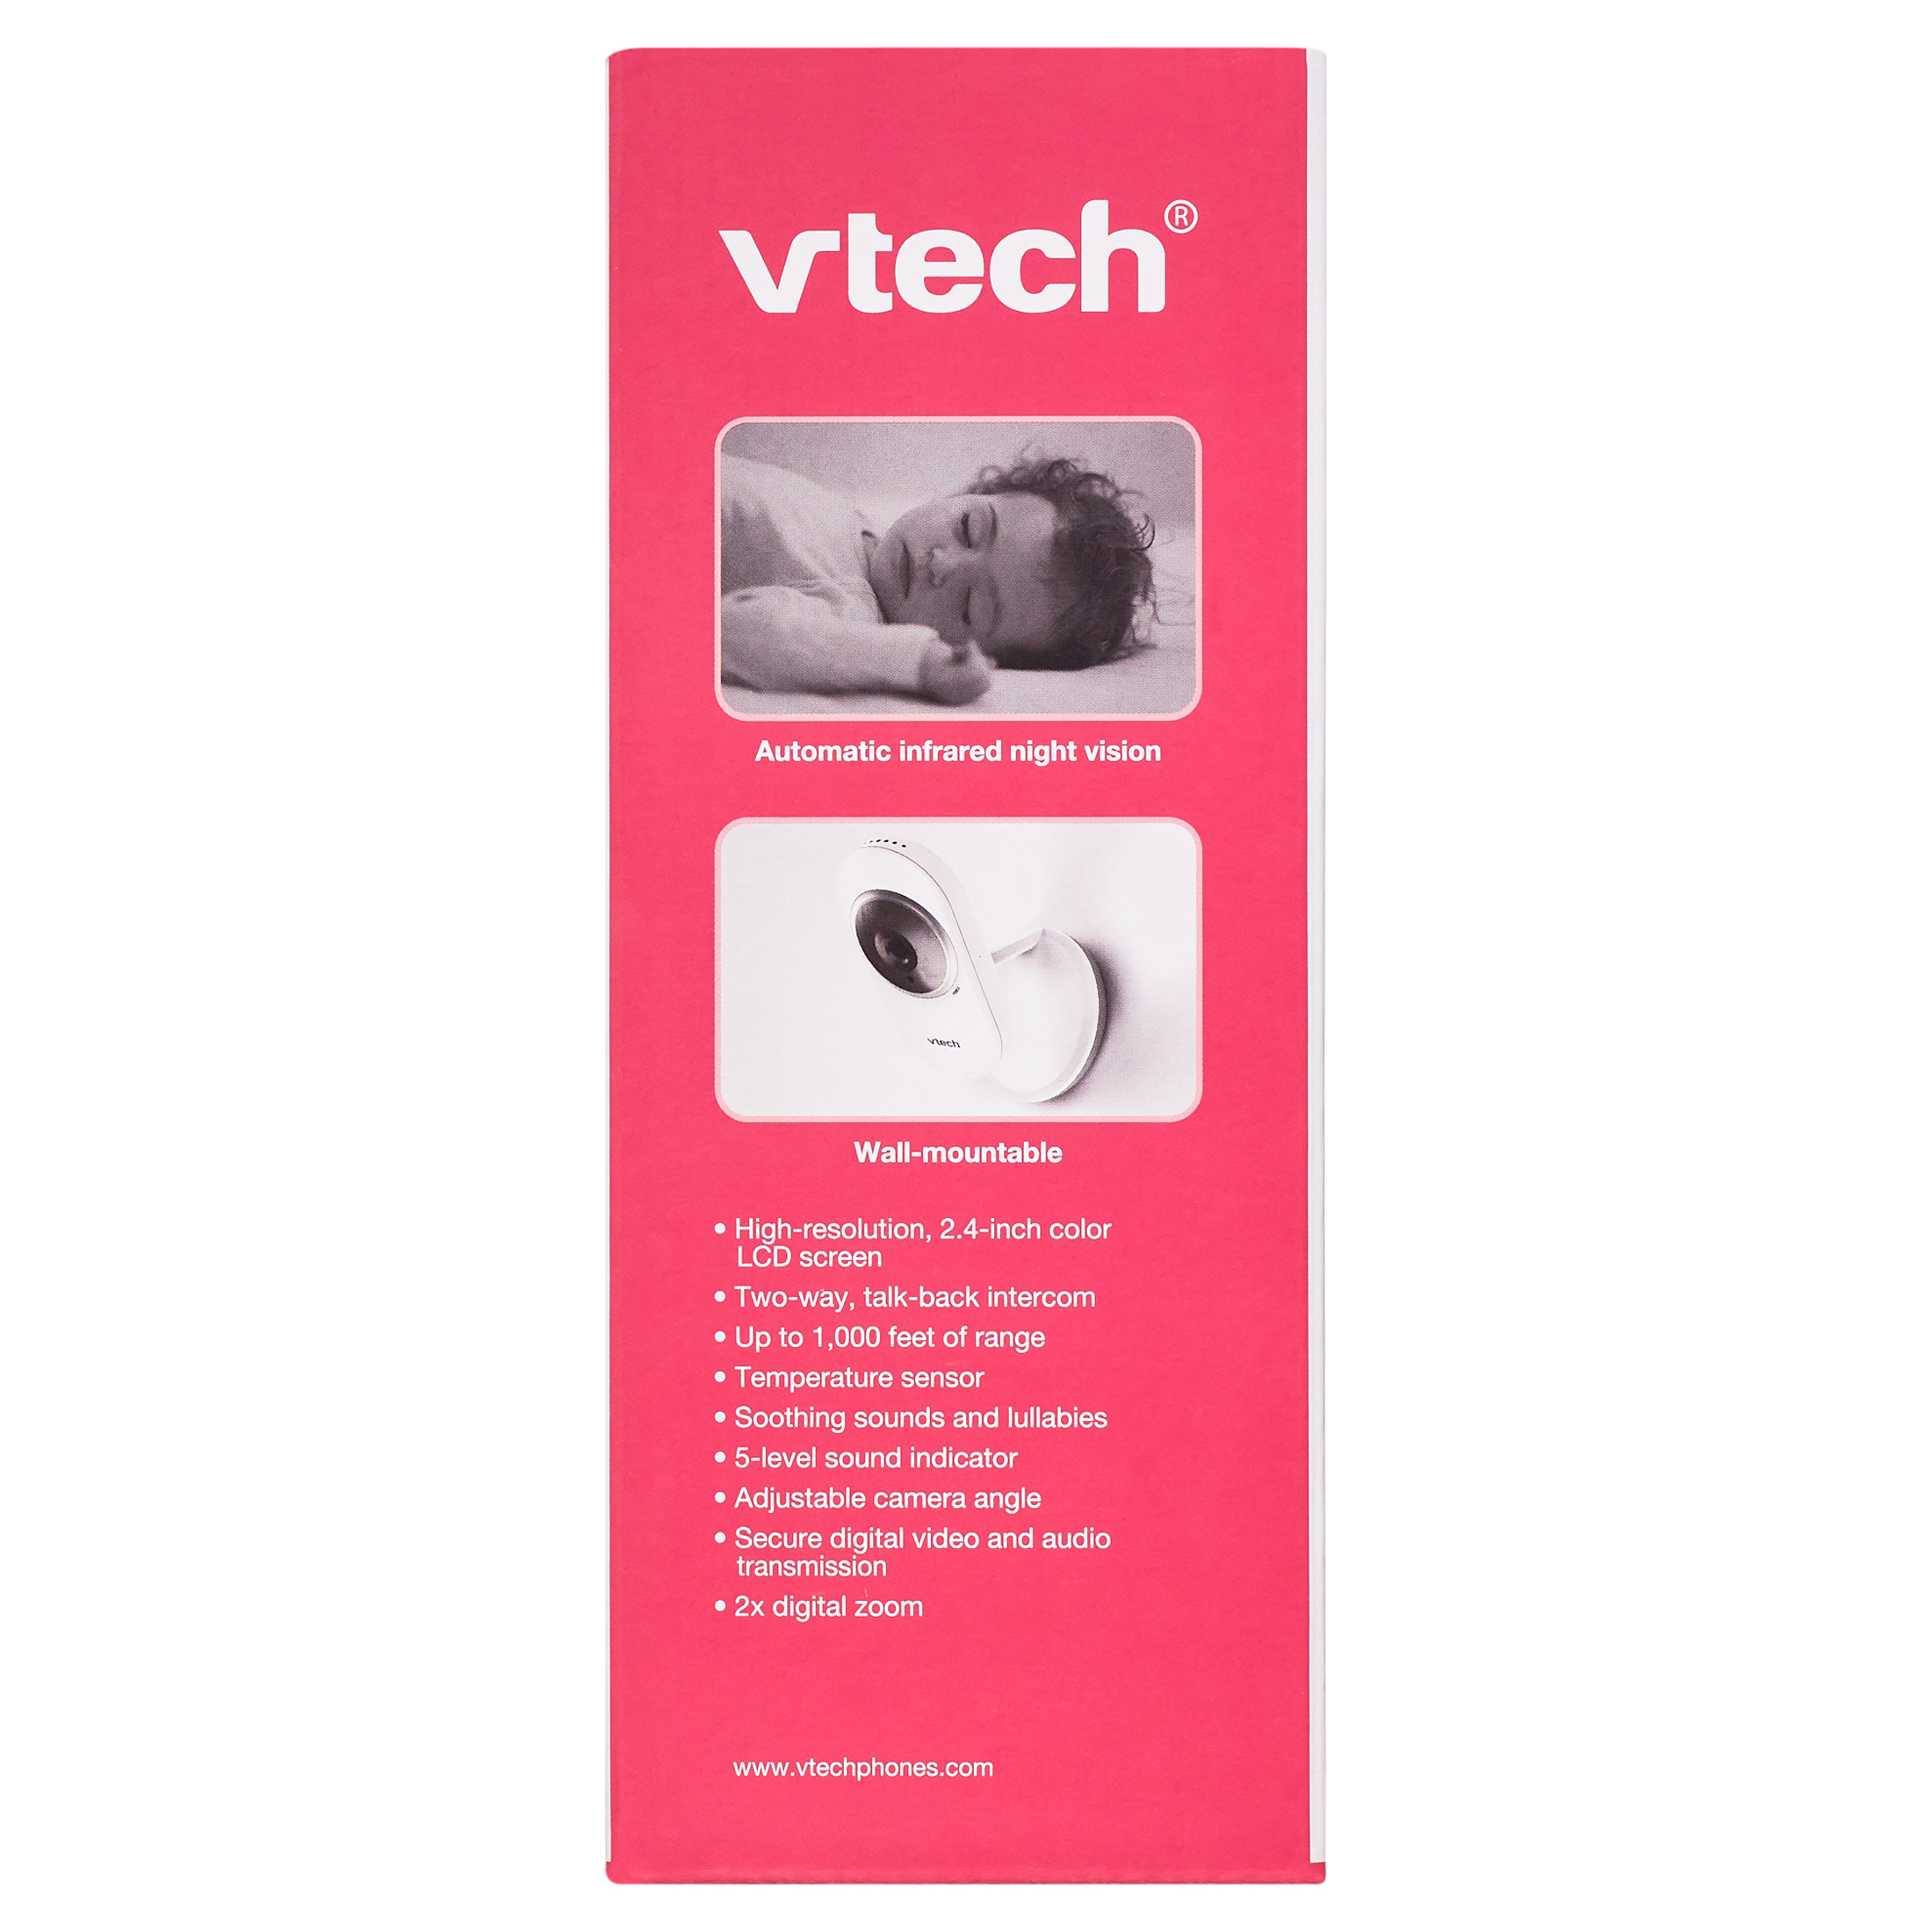 VTech VM320 2.4" Video Baby Monitor with Full-Color and Automatic Night Vision, White - image 3 of 8